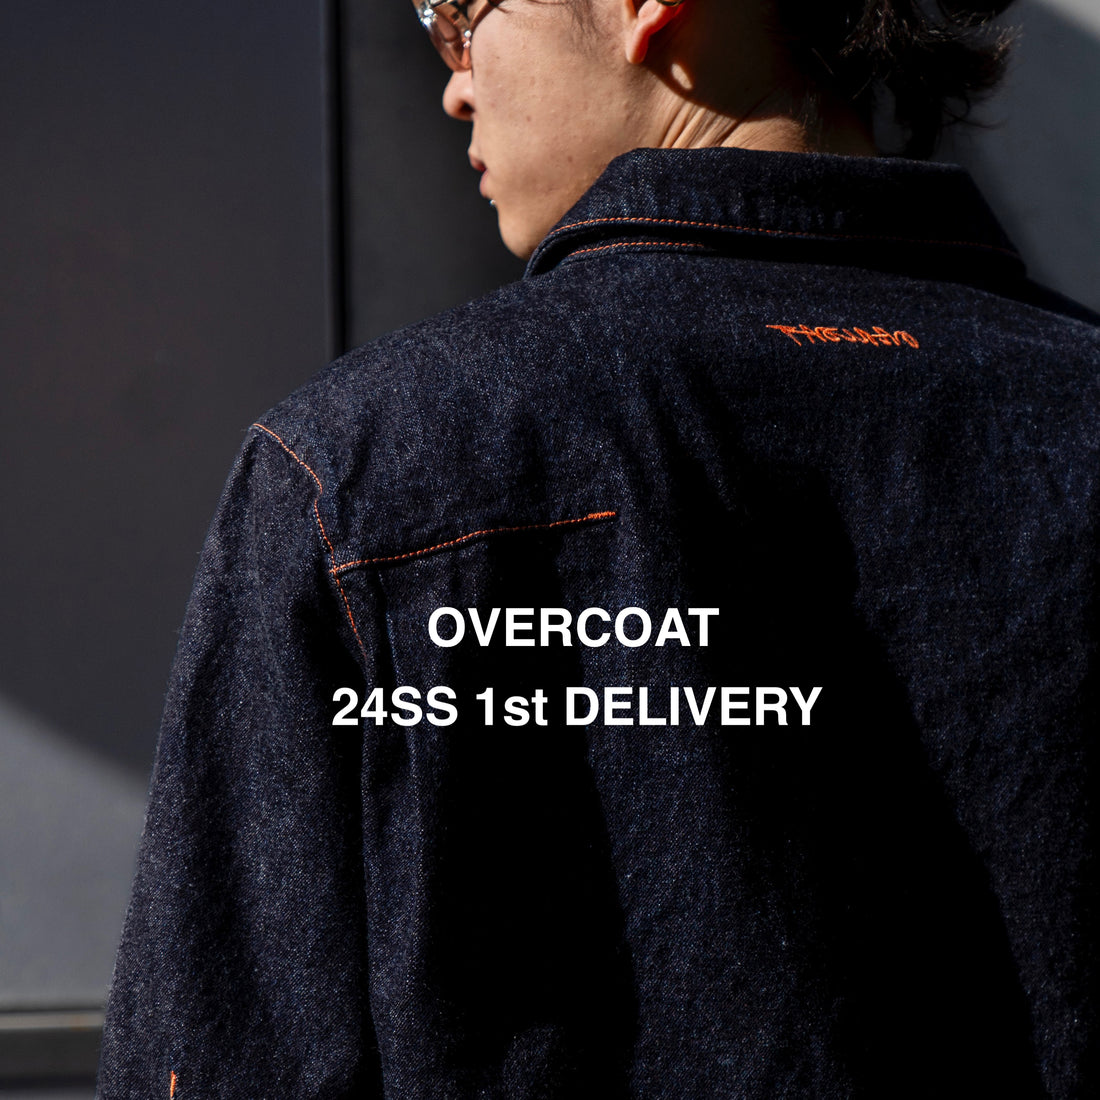 OVERCOAT 1st delivery